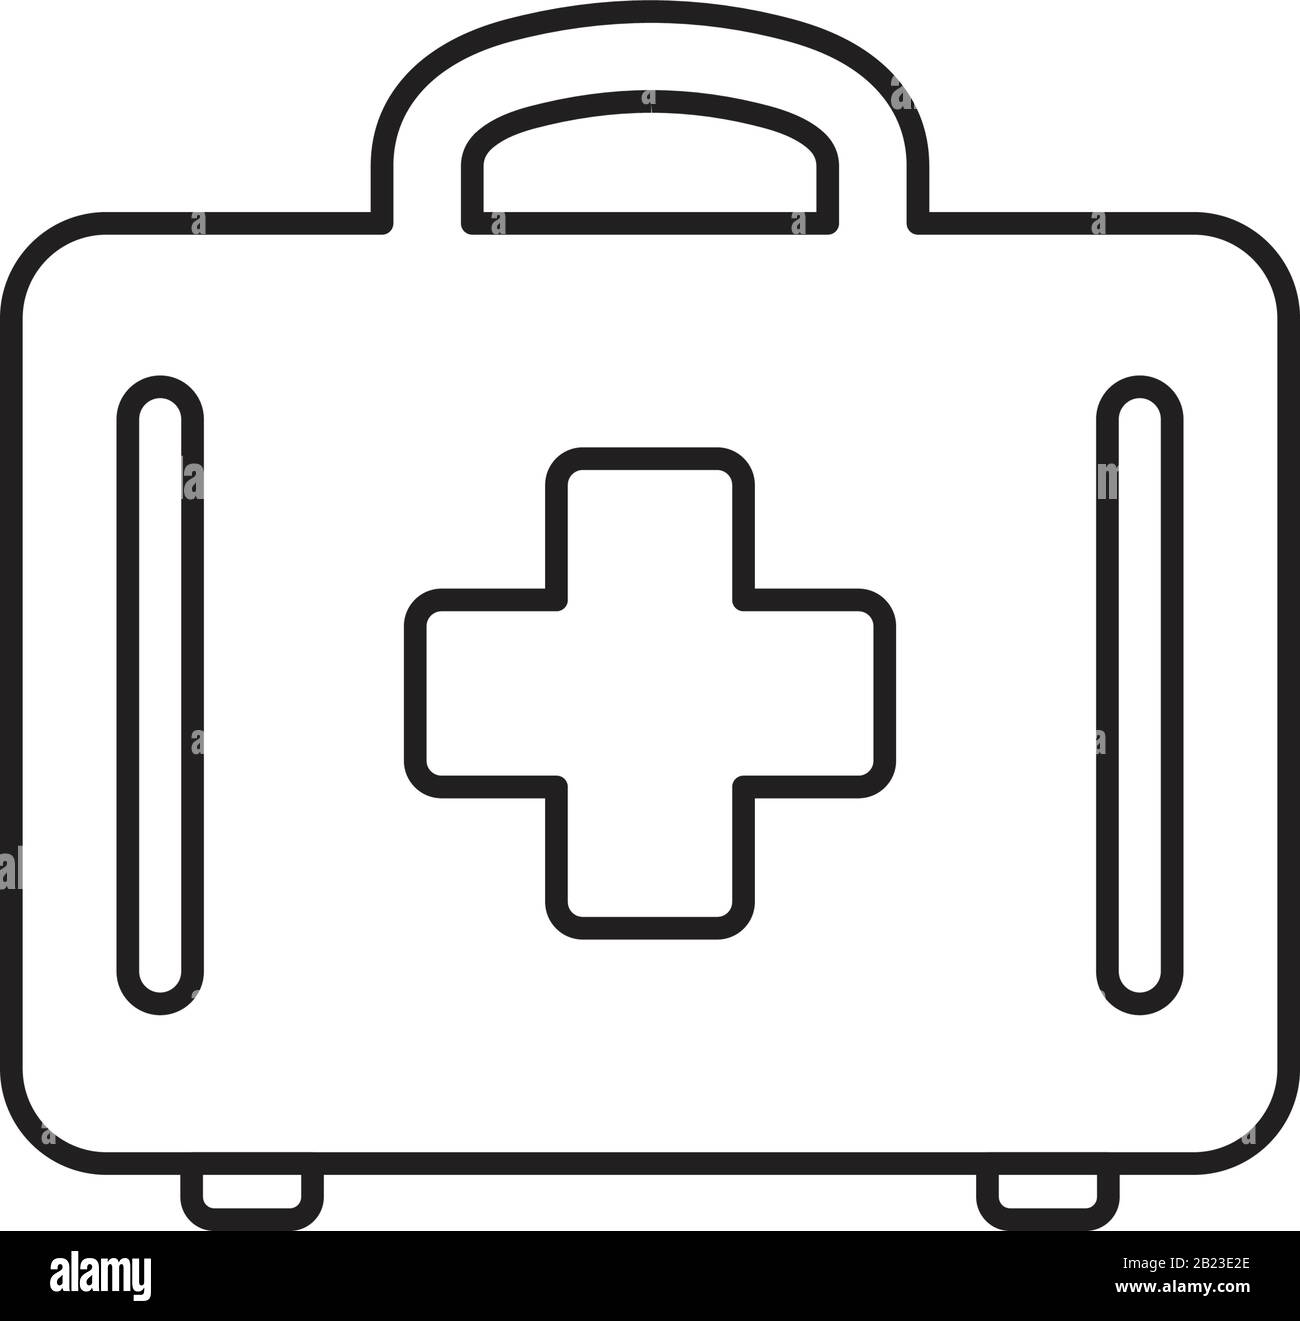 An injection first aid kit icon template black color editable. an injection first aid kit icon symbol Flat vector illustration for graphic and web des Stock Vector